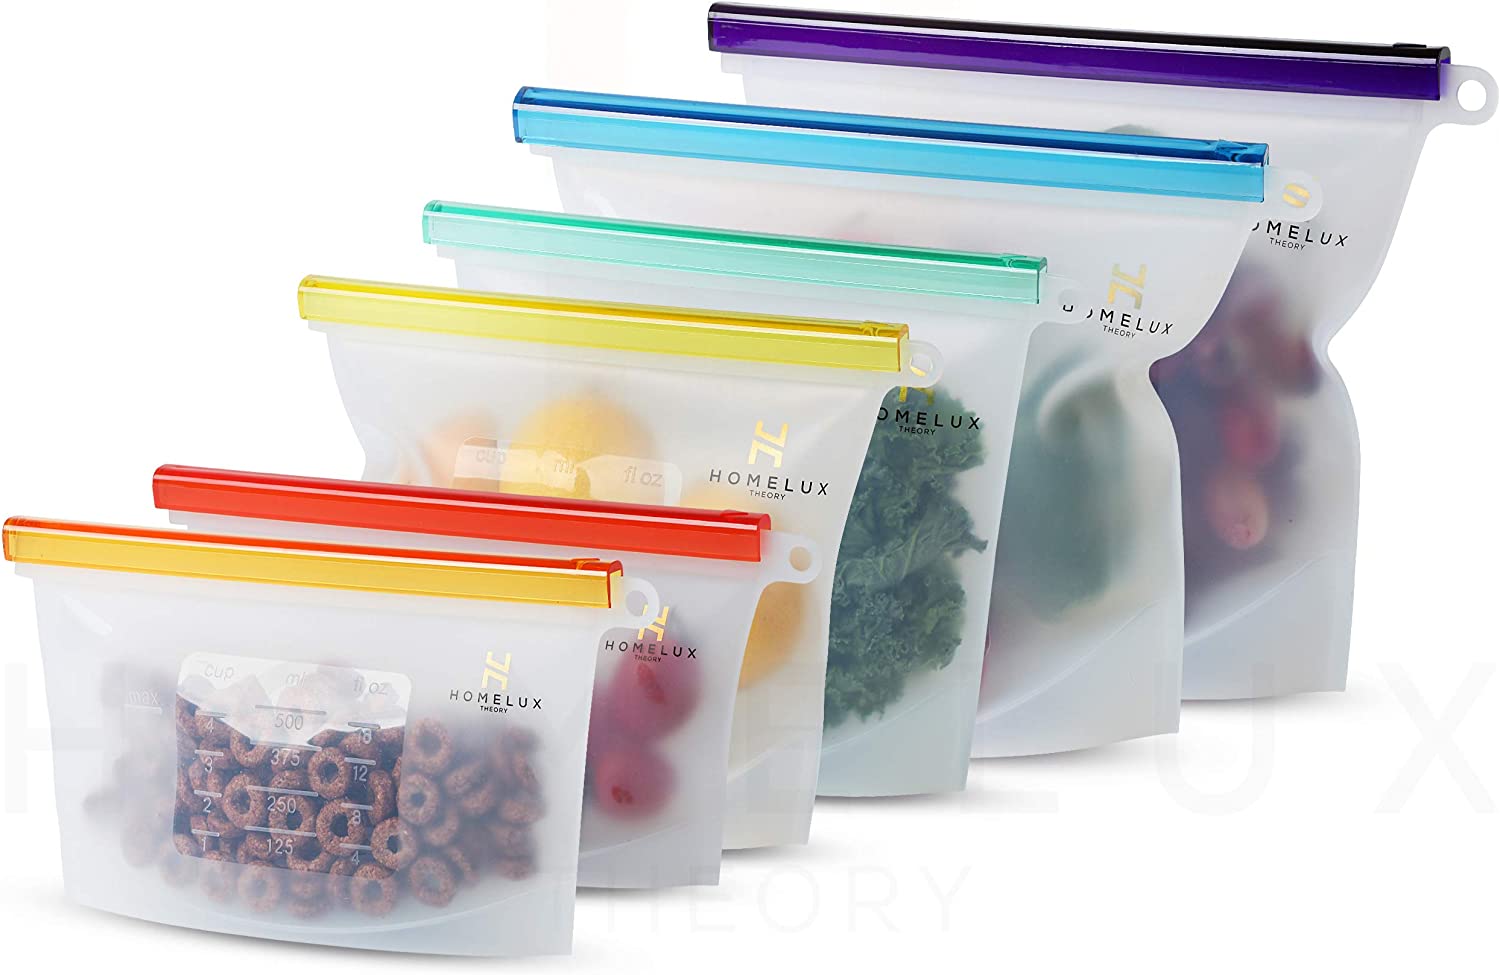 https://www.dontwasteyourmoney.com/wp-content/uploads/2021/04/homelux-theory-reusable-silicone-food-storage-bags-6-pack-1.jpg